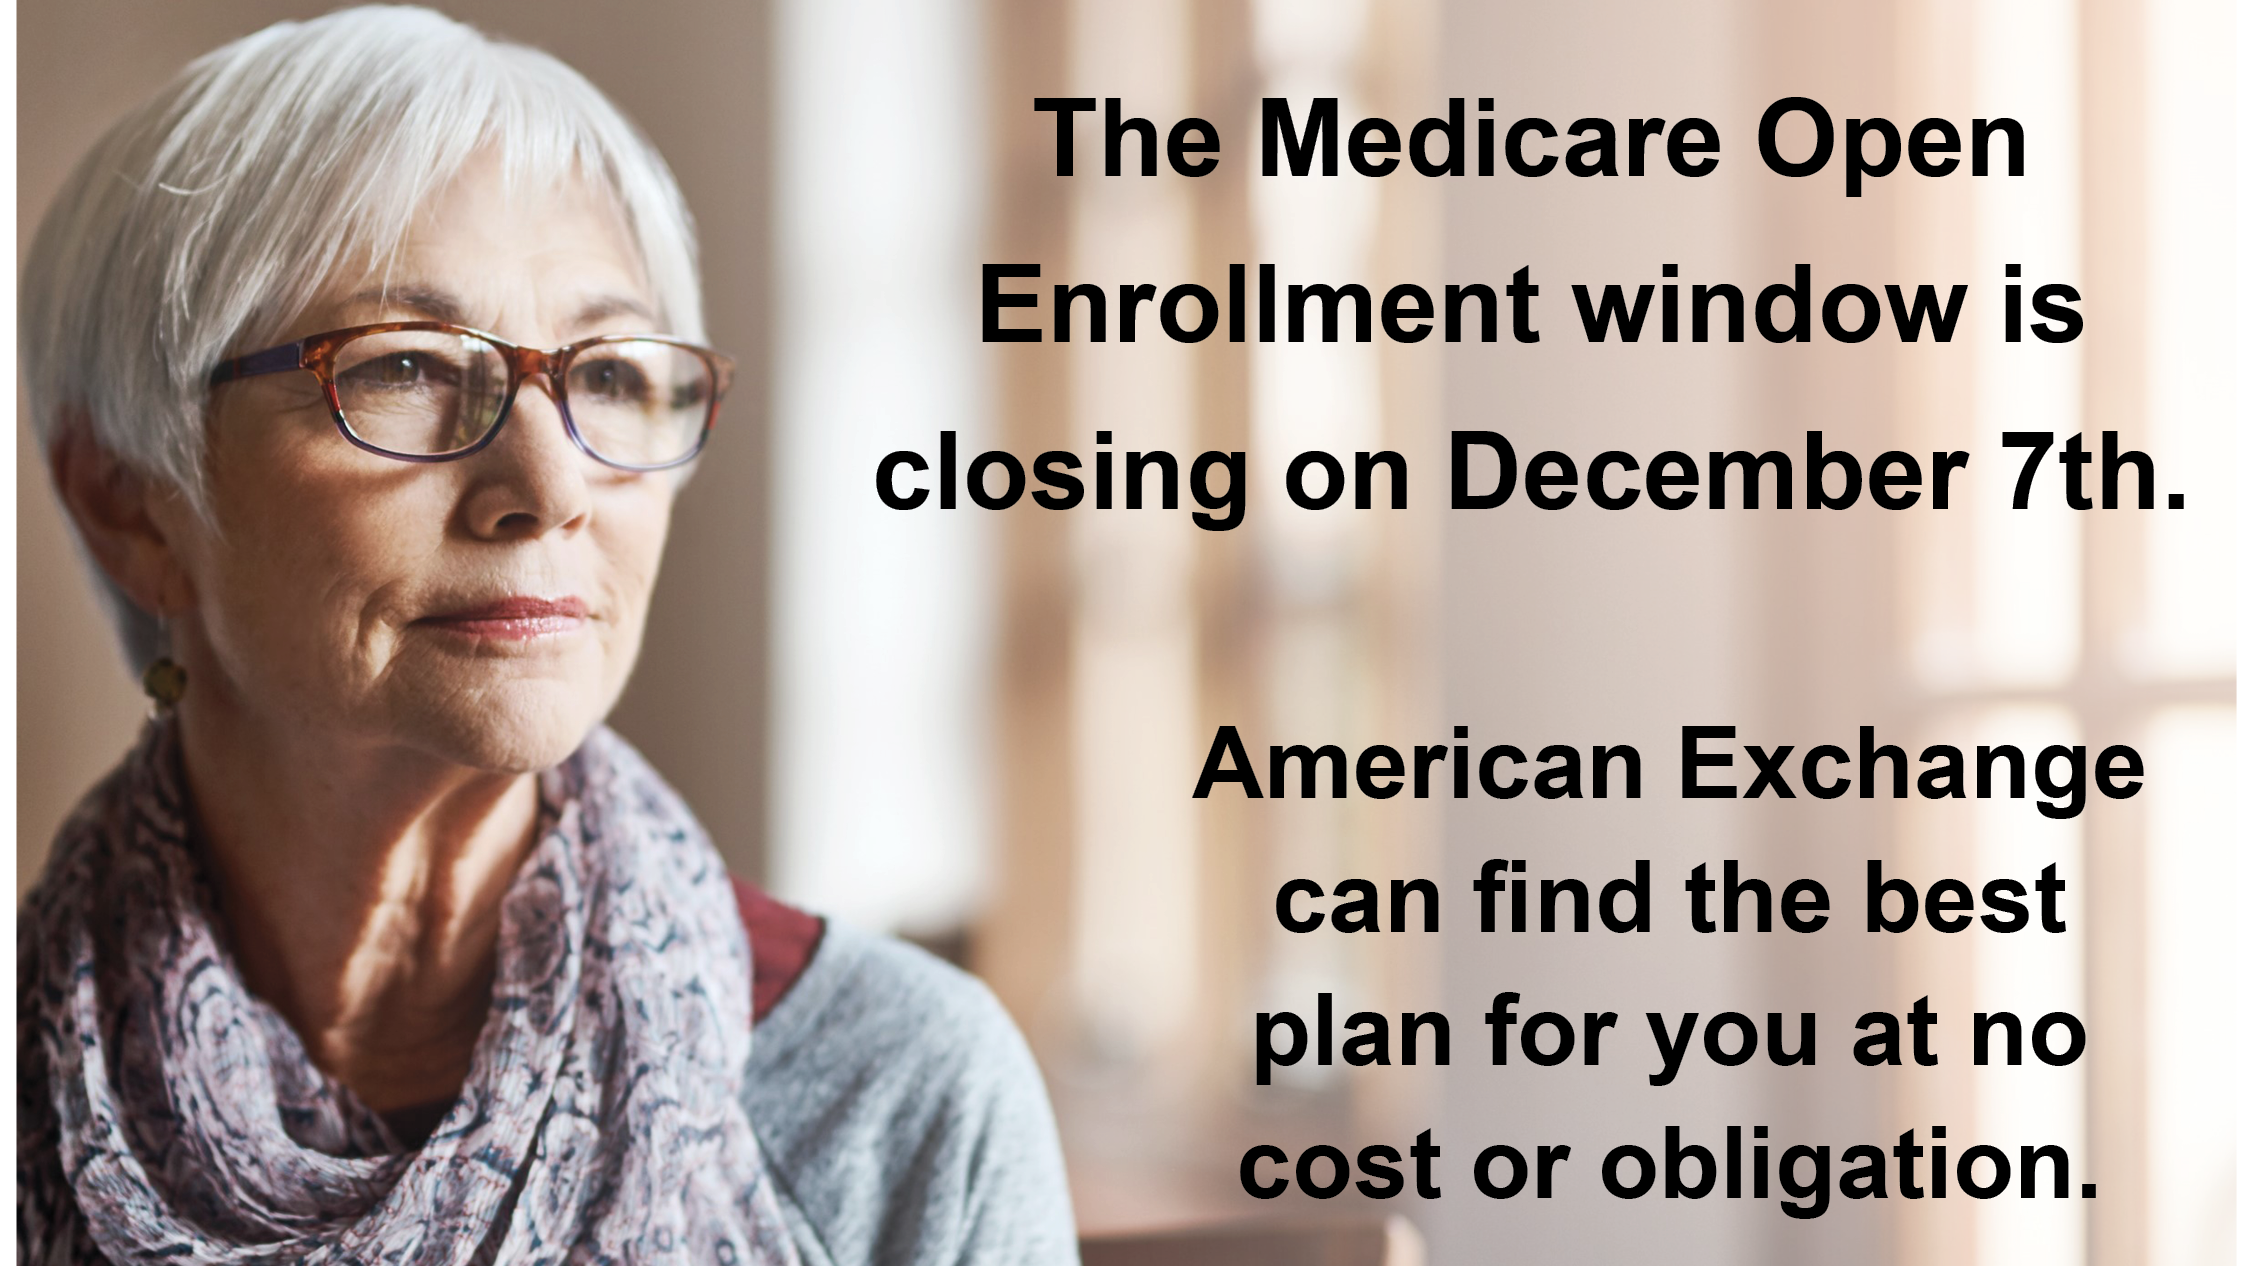 6 Reasons to Review Your Medicare Coverage During Open Enrollment